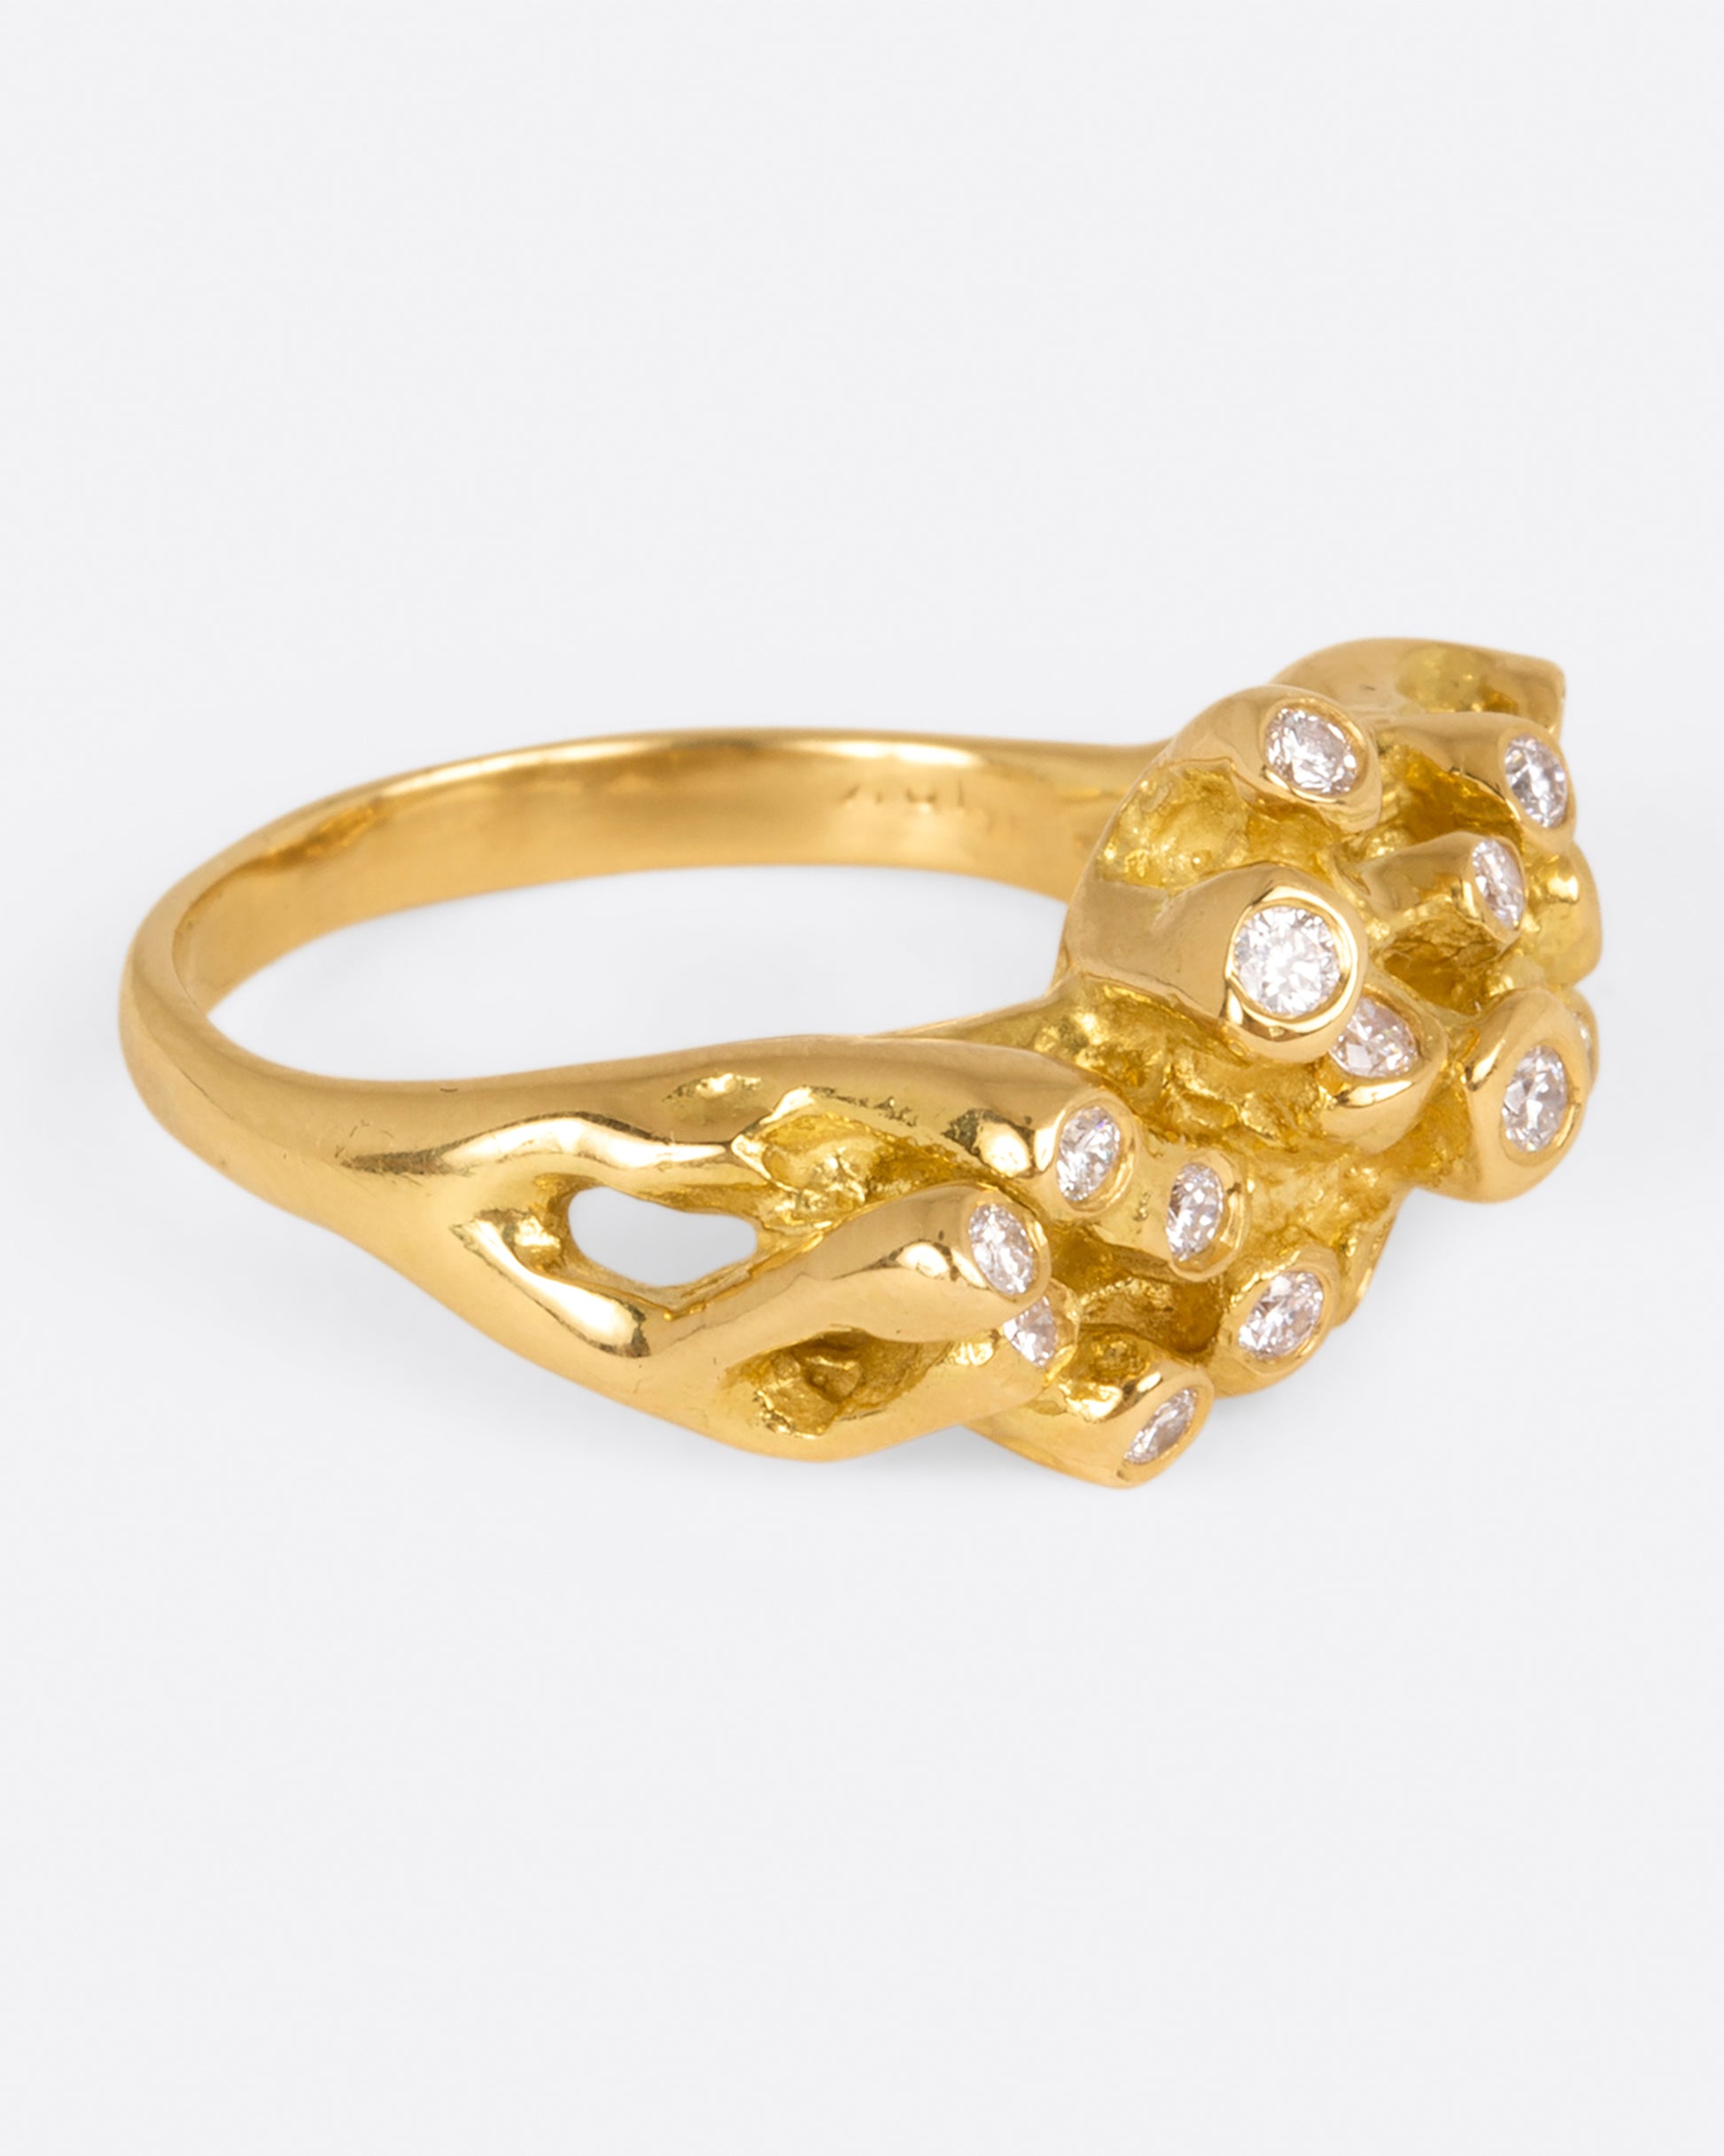 A yellow gold ring with sea anemone tentacles, dotted with diamonds, shown from side.